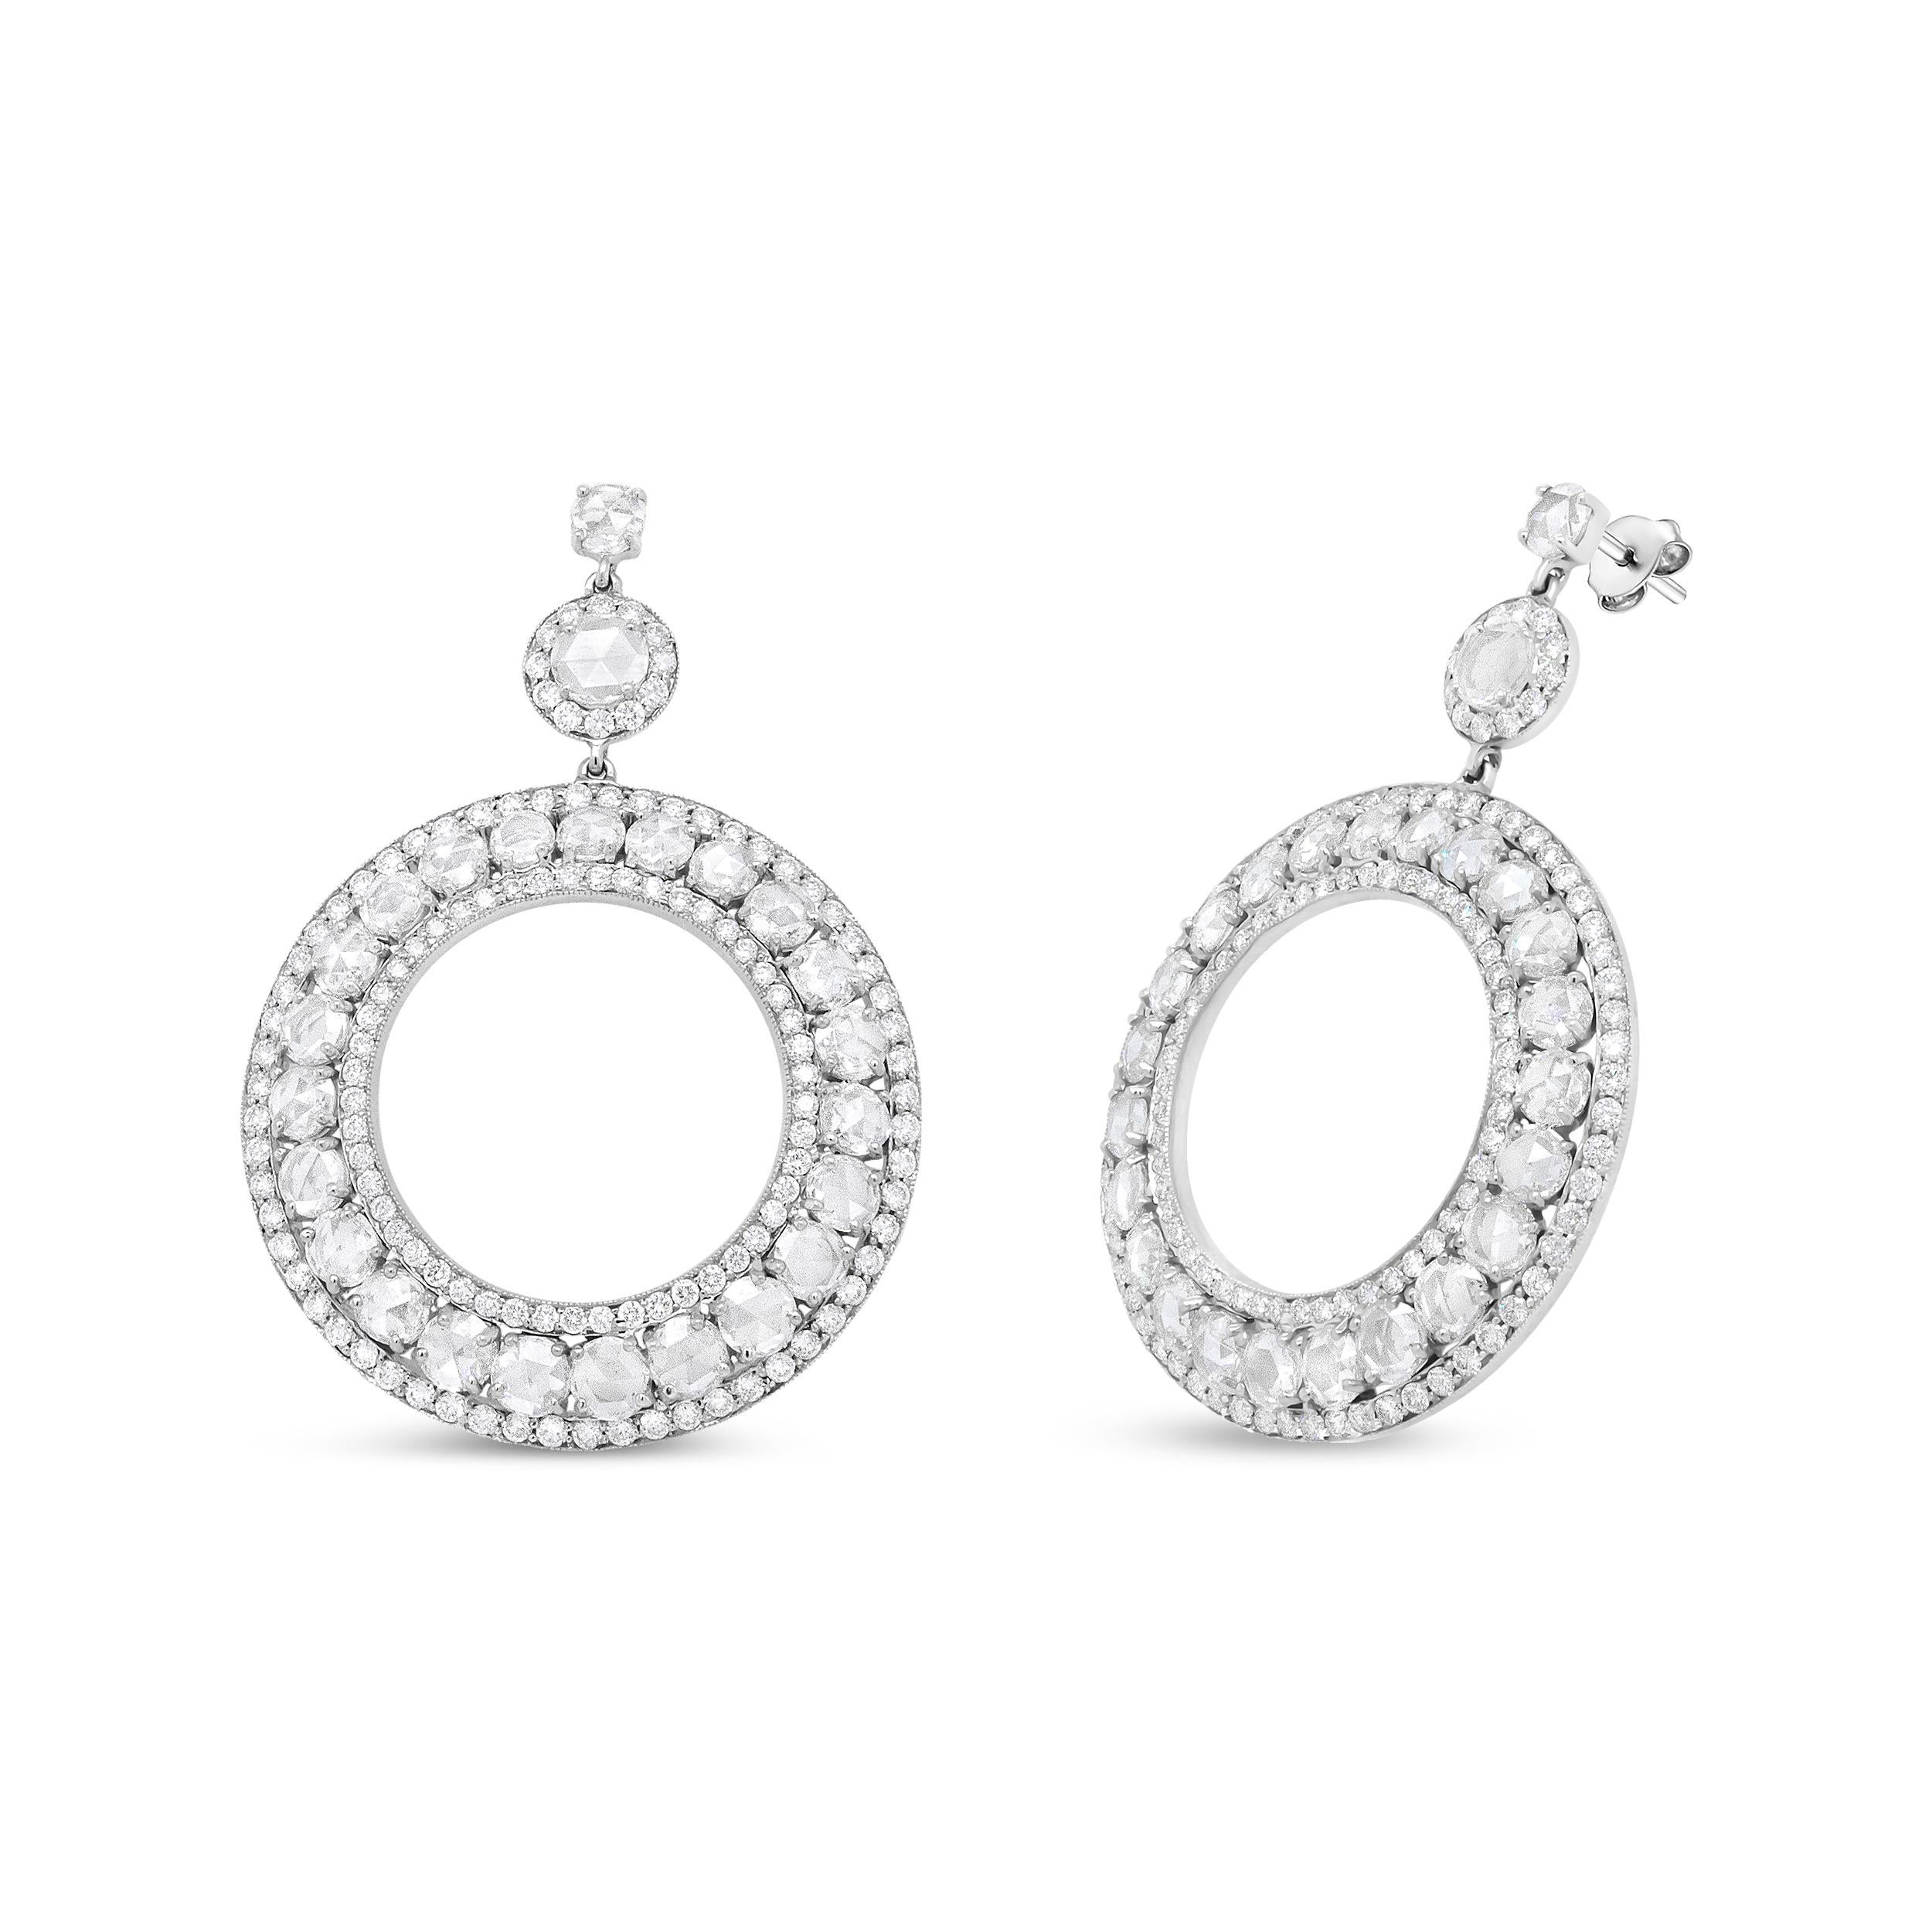 Turn heads in this forward-thinking pair of diamond earrings for her. This classic yet modern pair emulates elegance in its most contemporary form, evocative and artfully formed in an openwork circle silhouette. Pave-set round diamonds are